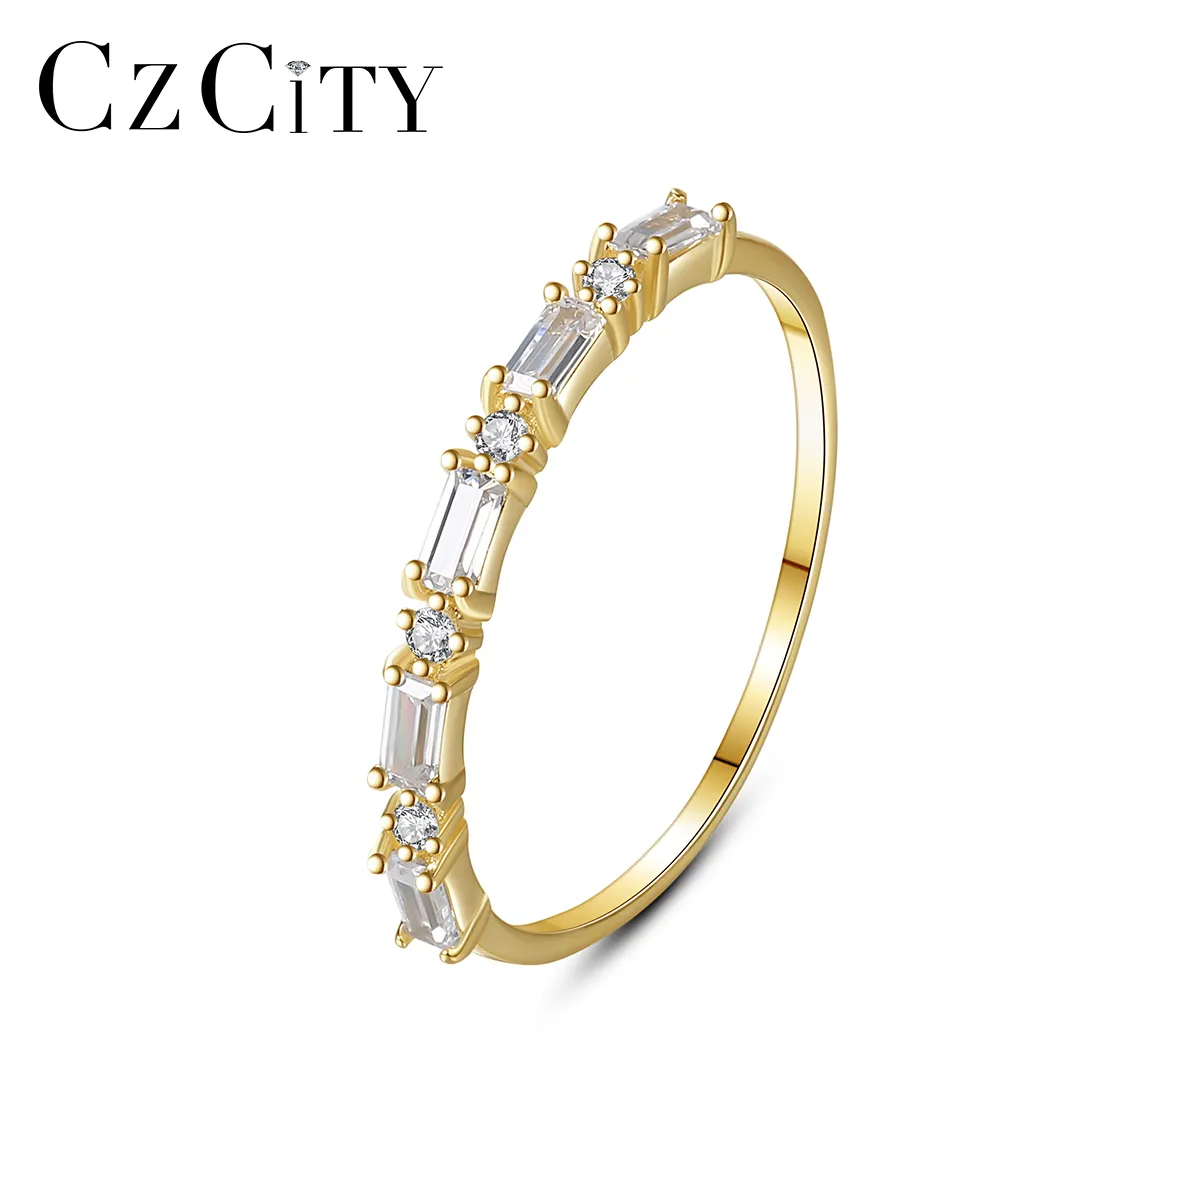 CZCITY Diamond Woman Gold Silver Band Golden Zircon Sterling Design Fashion CZ Candy Lady Popular Ring